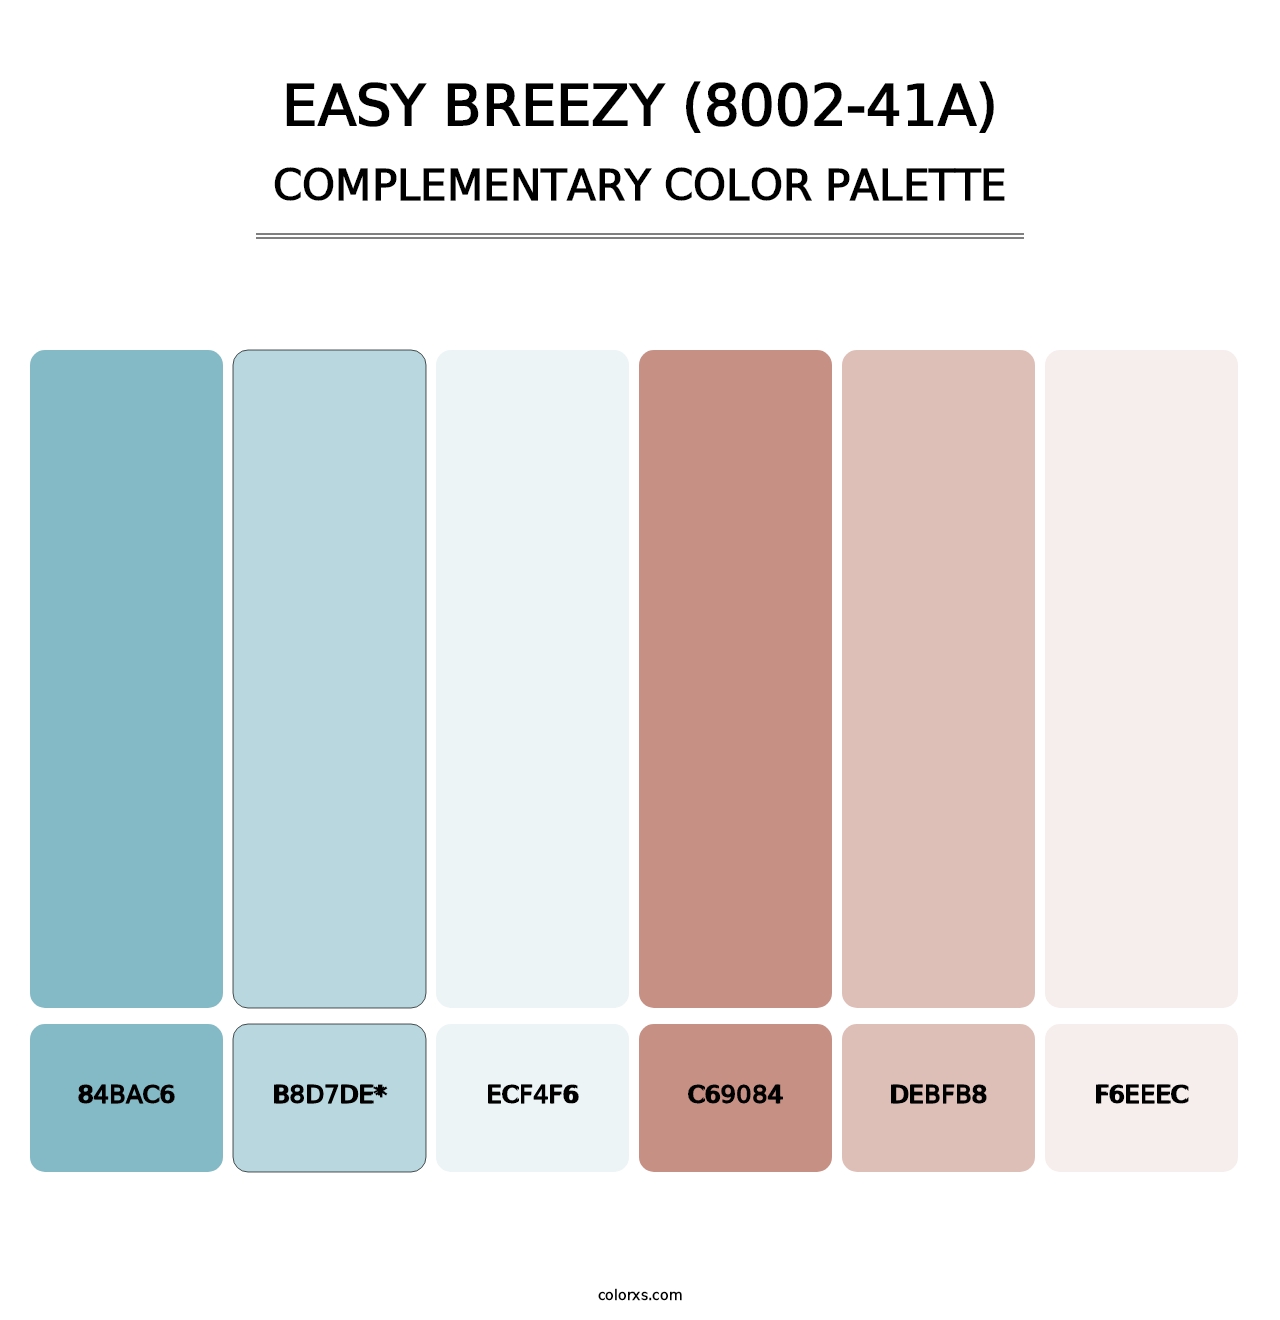 Easy Breezy (8002-41A) - Complementary Color Palette